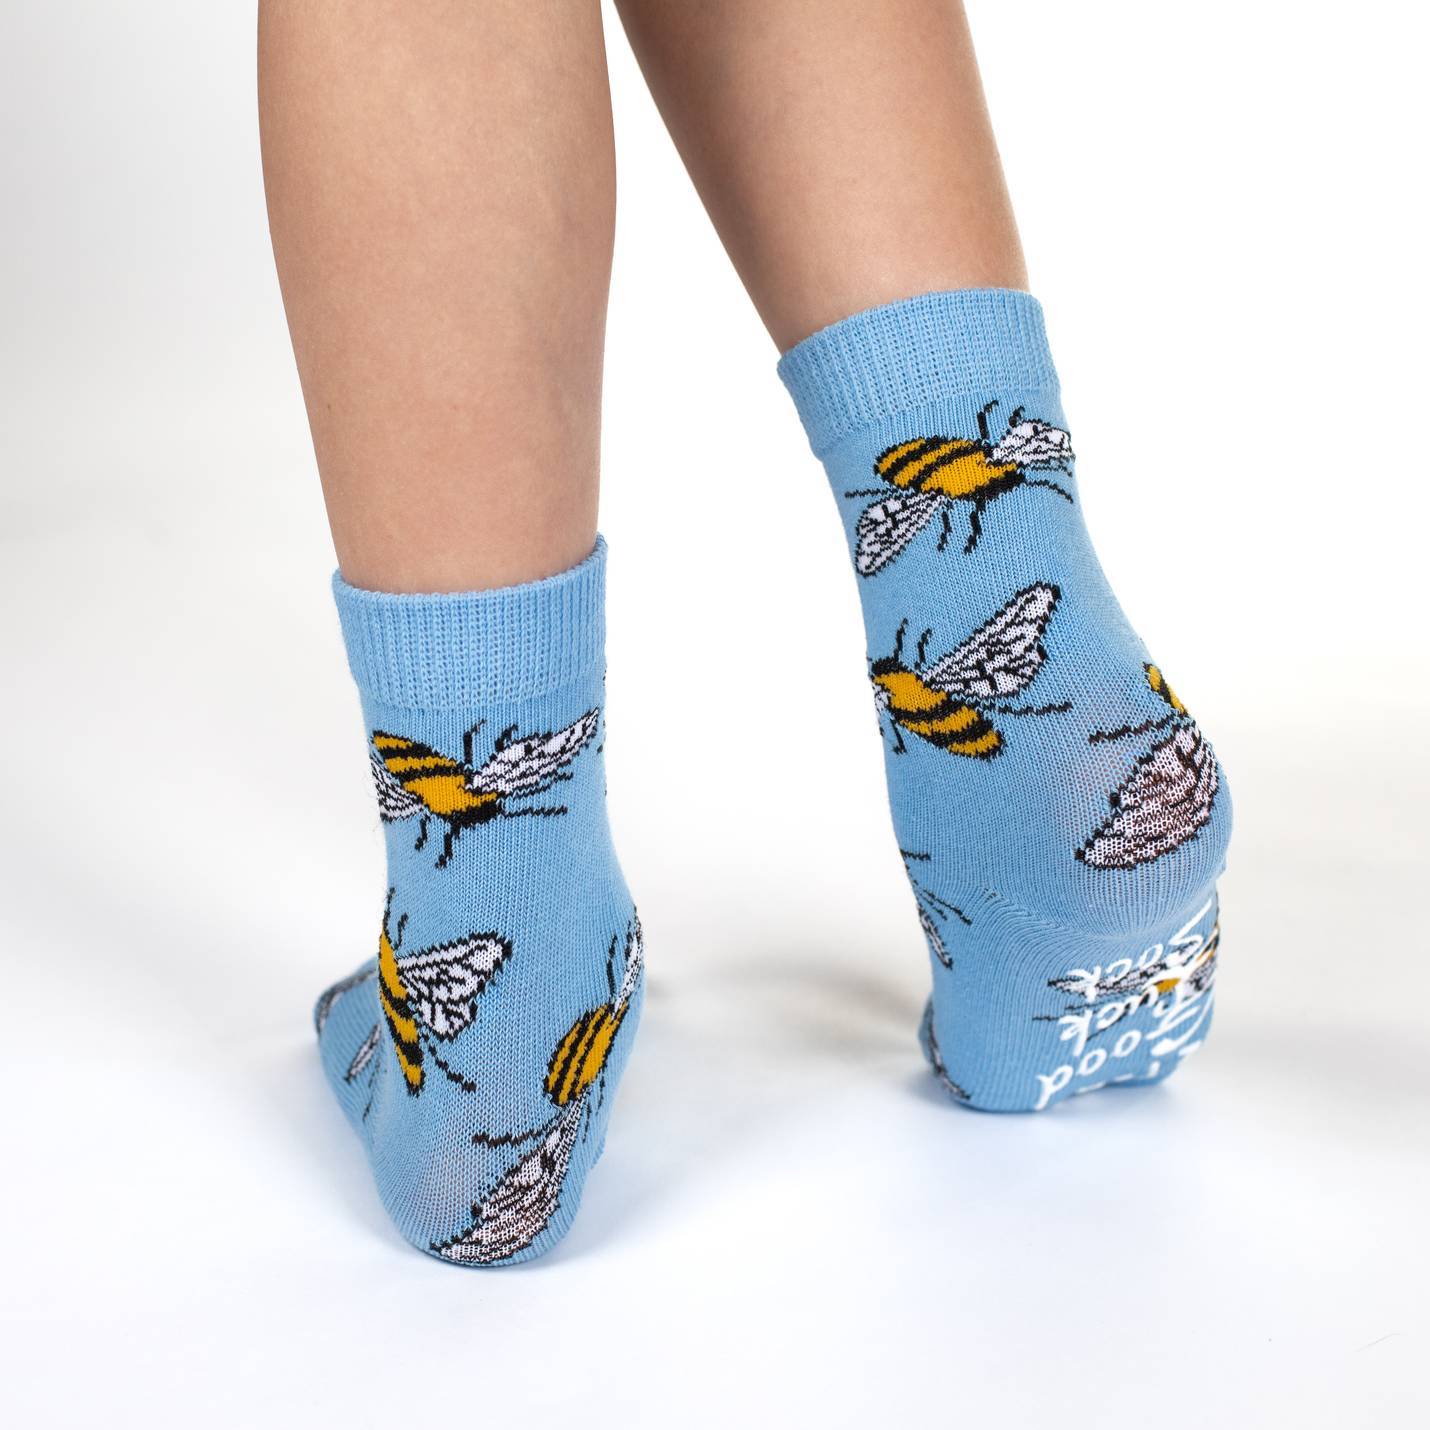 Bees, Bunnies, and Dogs Baby/Kids Socks 3pk